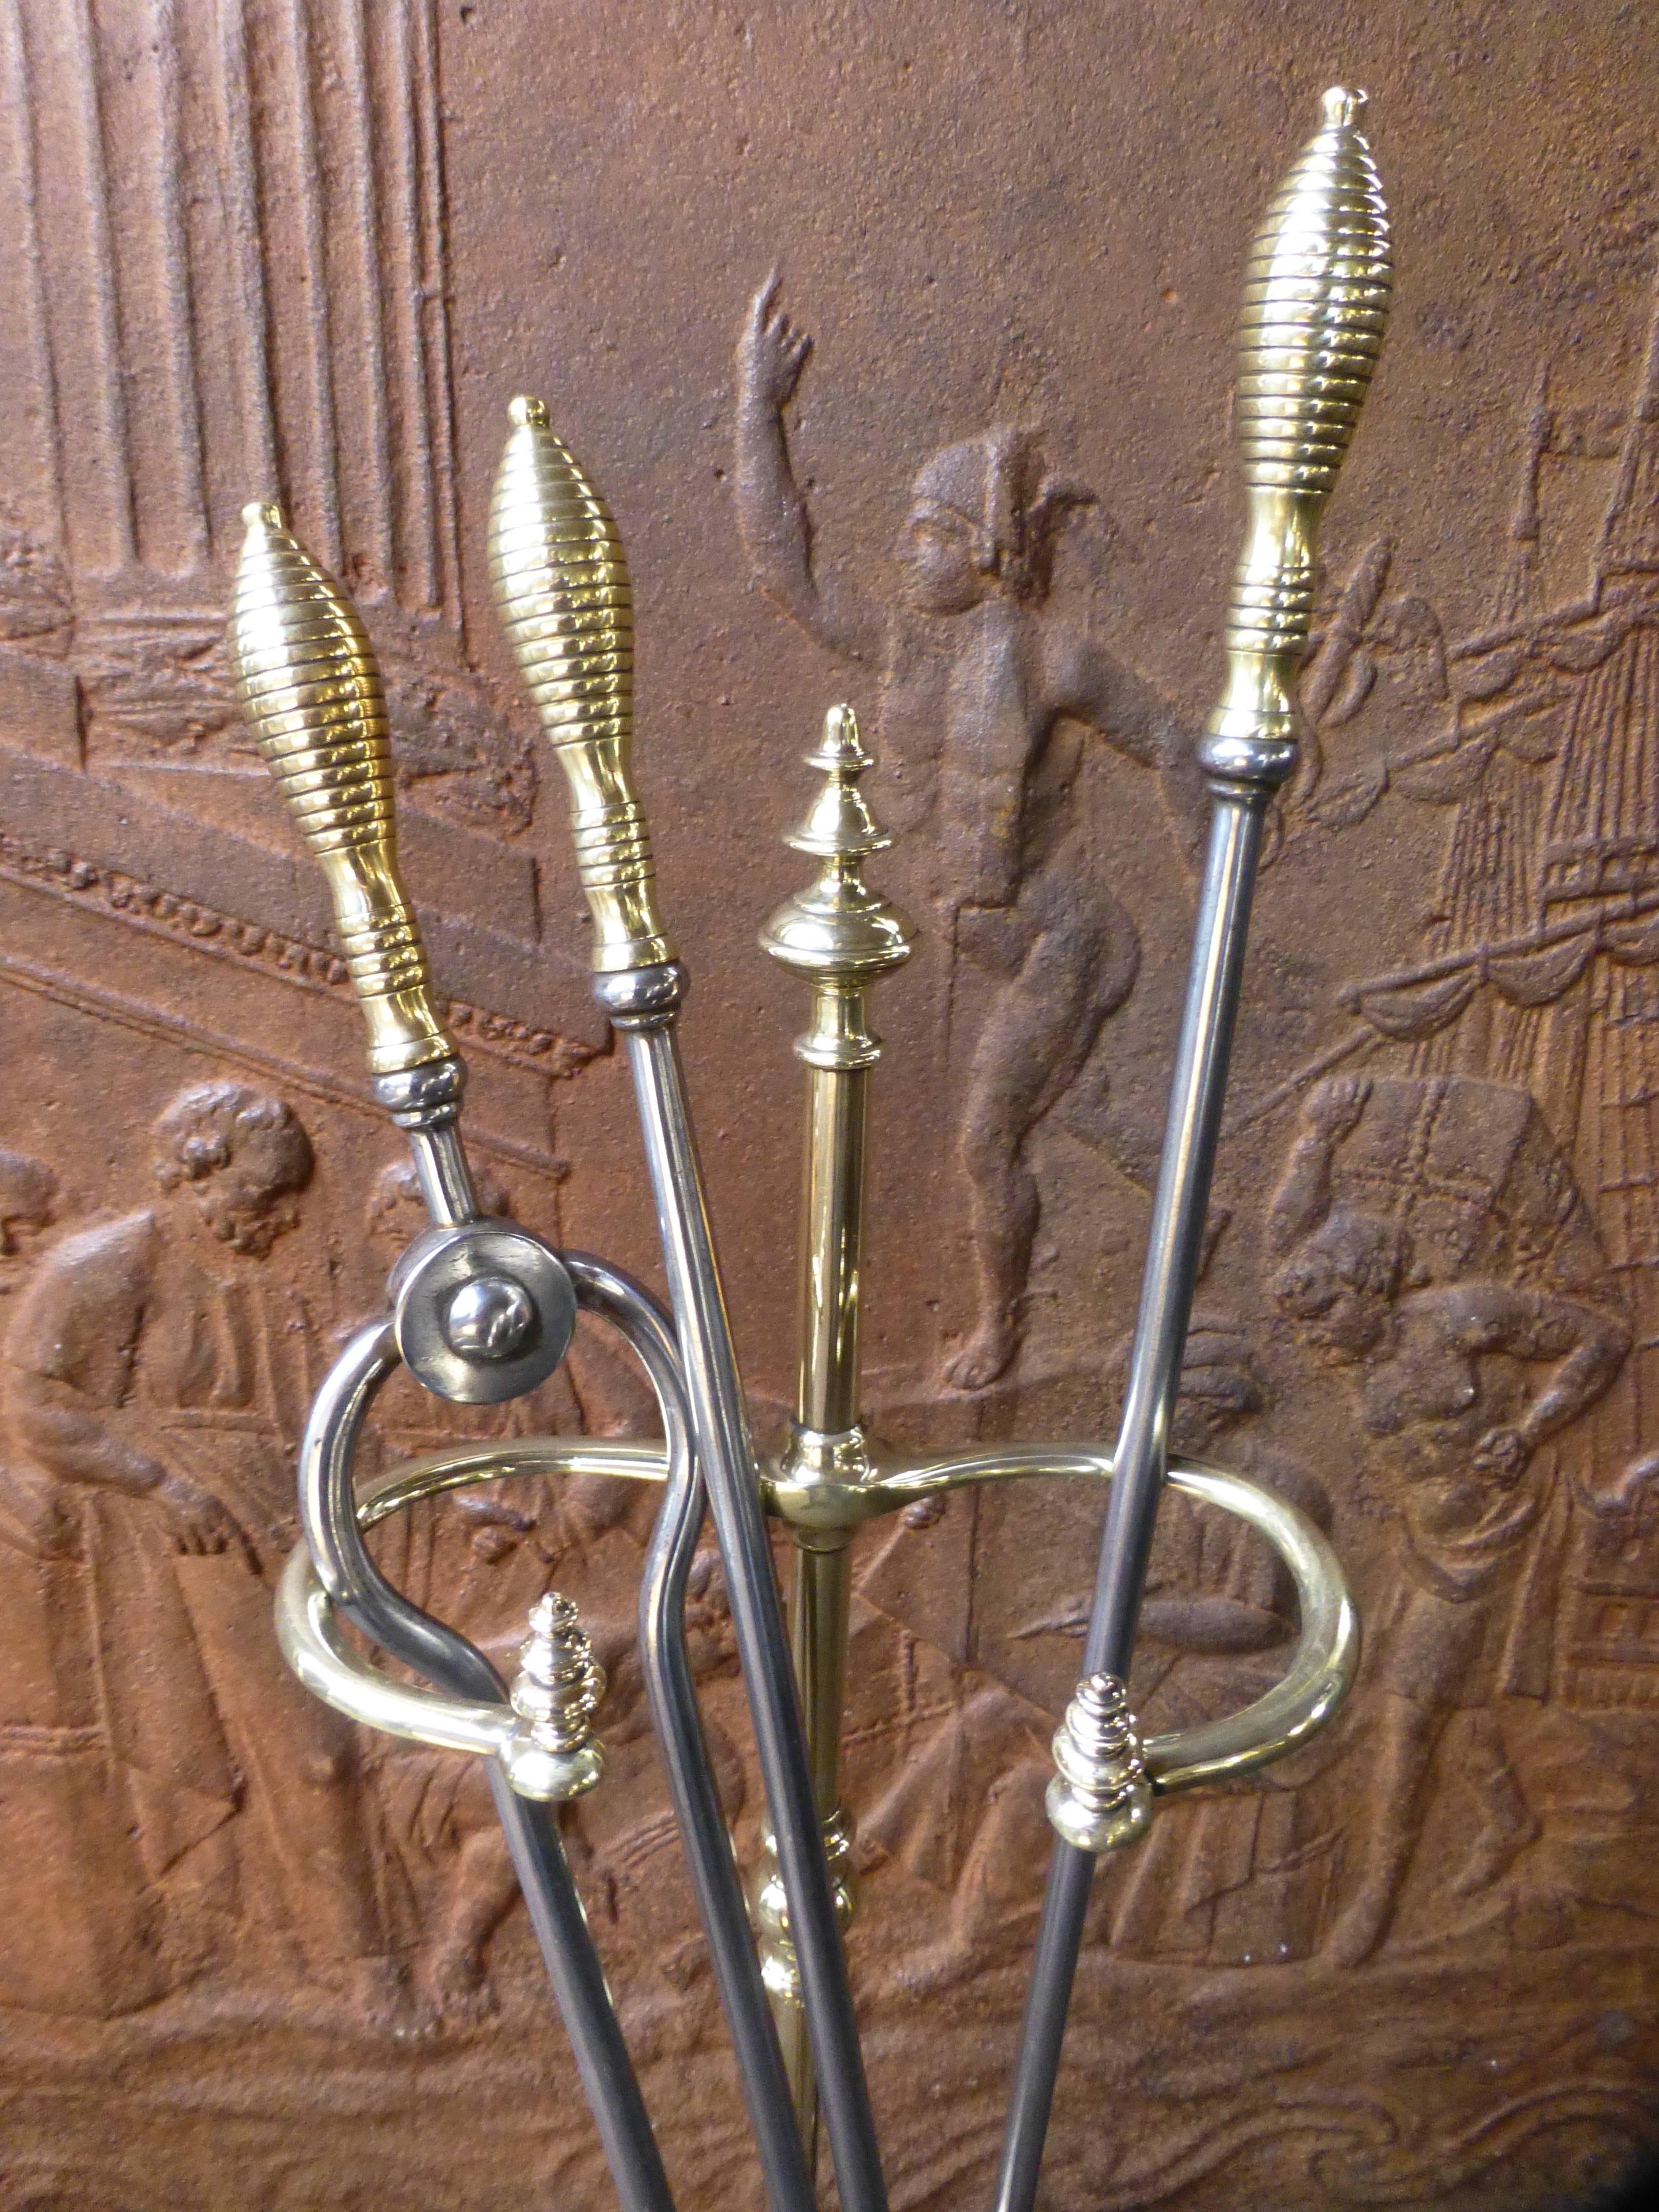 British Antique Polished Brass and Steel Fire Tool Set and Stand, 19th Century